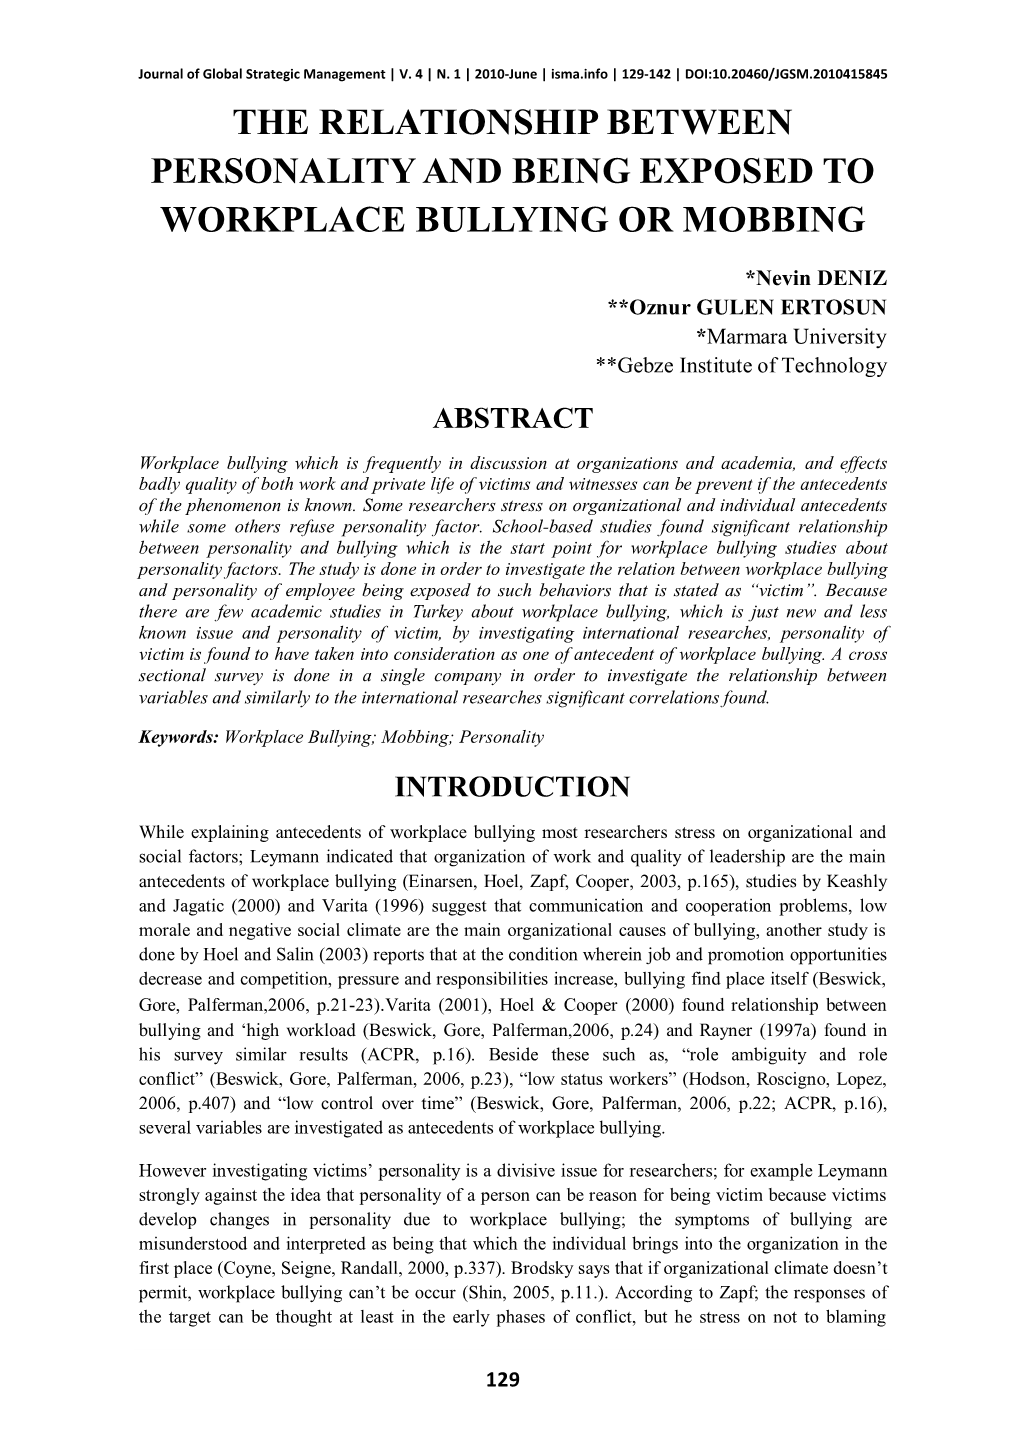 The Relationship Between Personality and Being Exposed to Workplace Bullying Or Mobbing